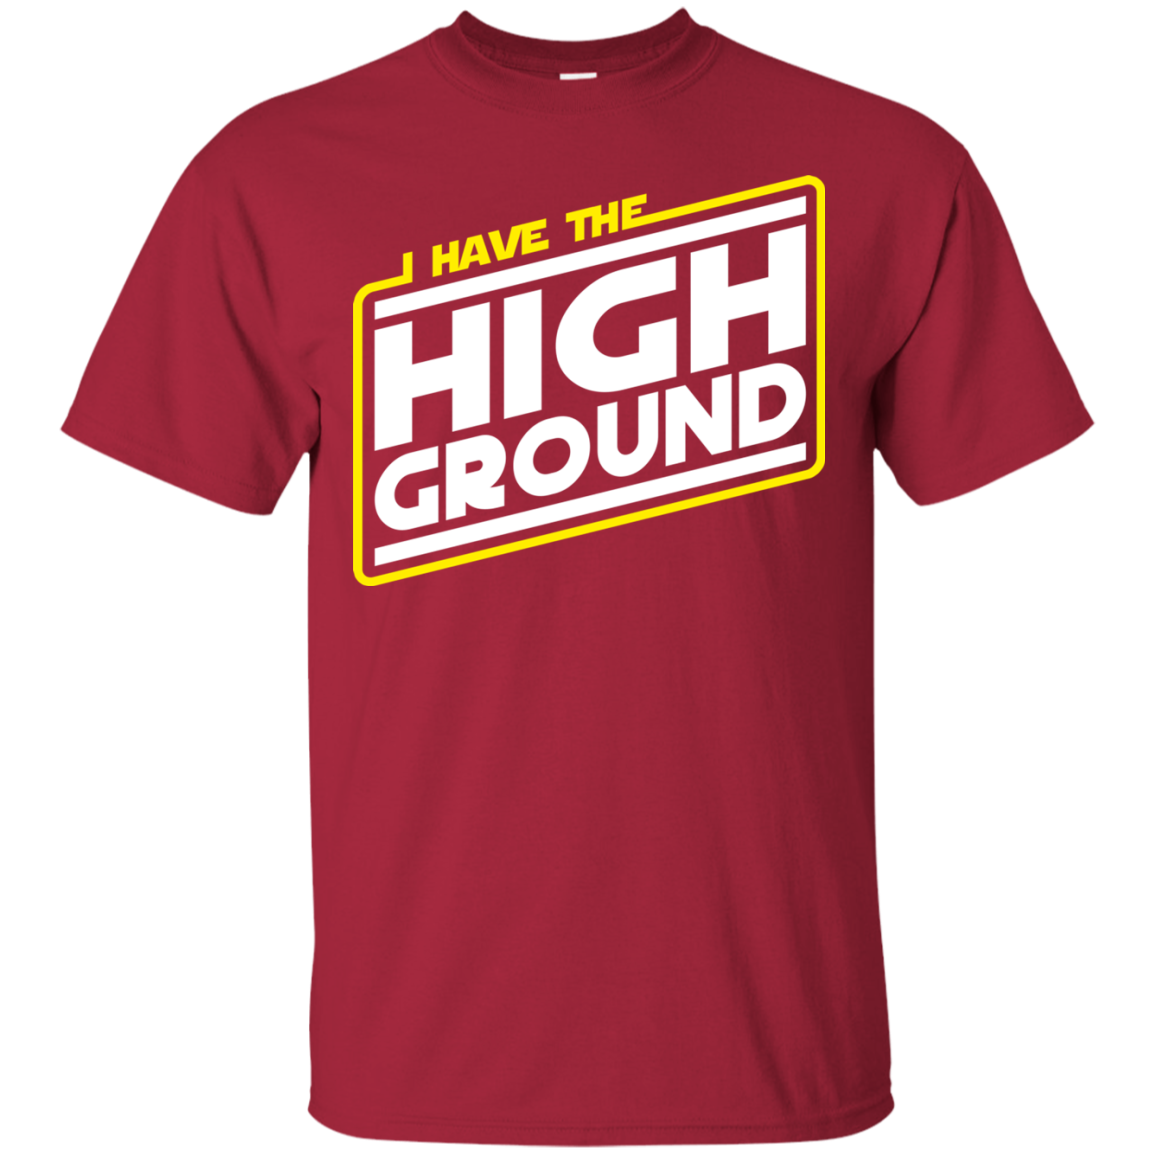 I Have the High Ground T-Shirt